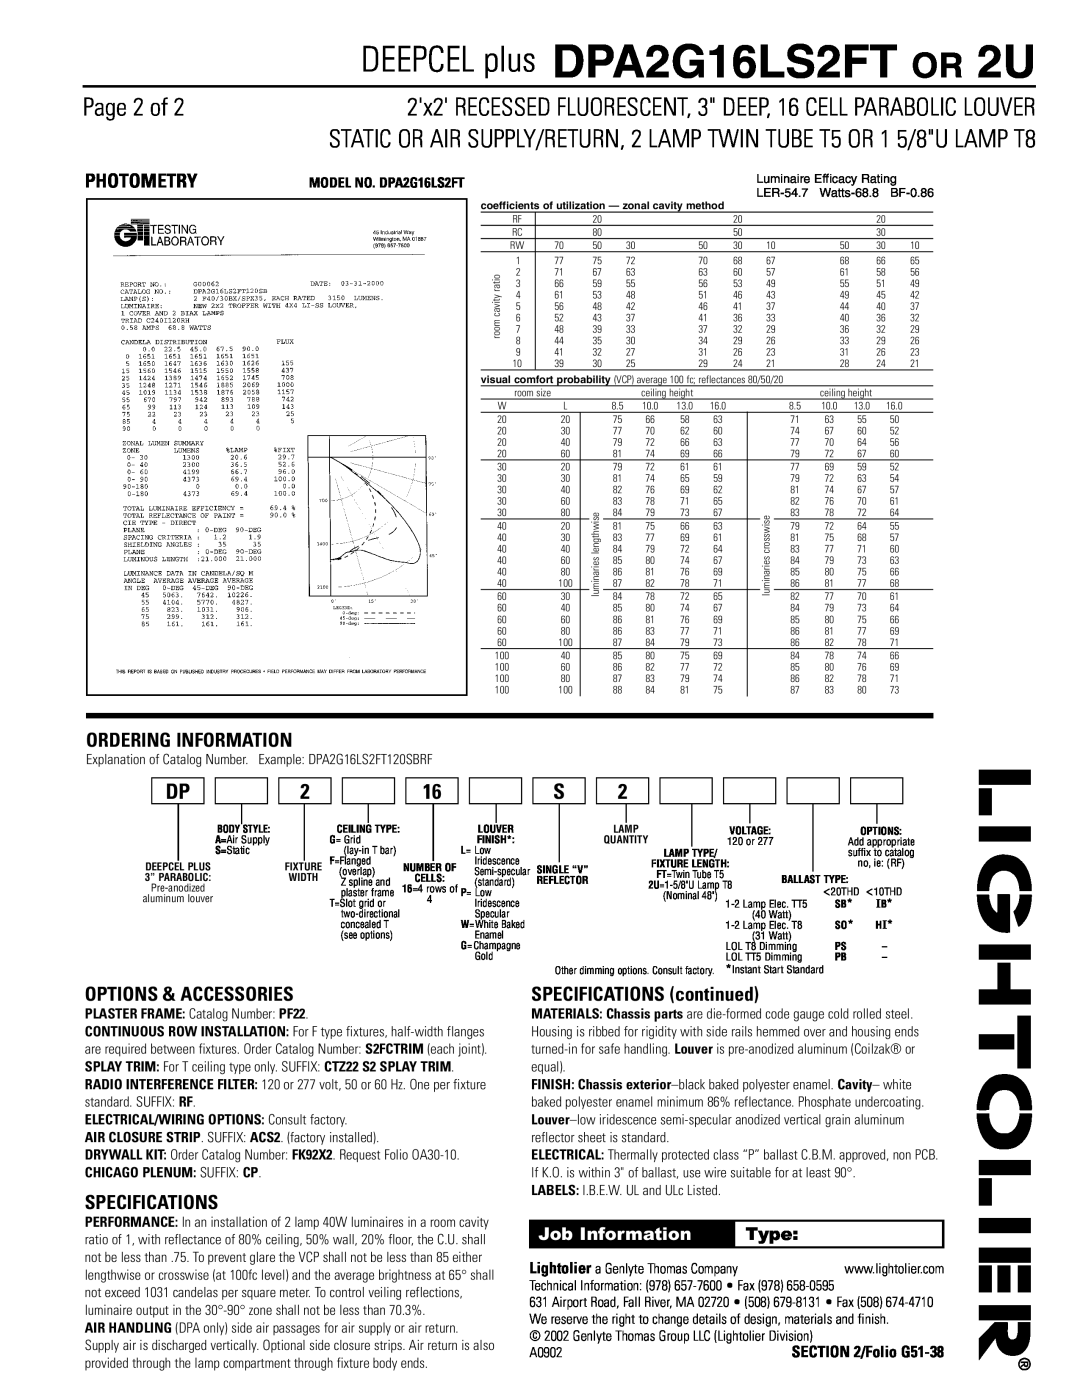 Lightolier DPA2G16LS2FT or 2U dimensions Page 2 of, Photometry, Ordering Information, Options & Accessories, Specifications 